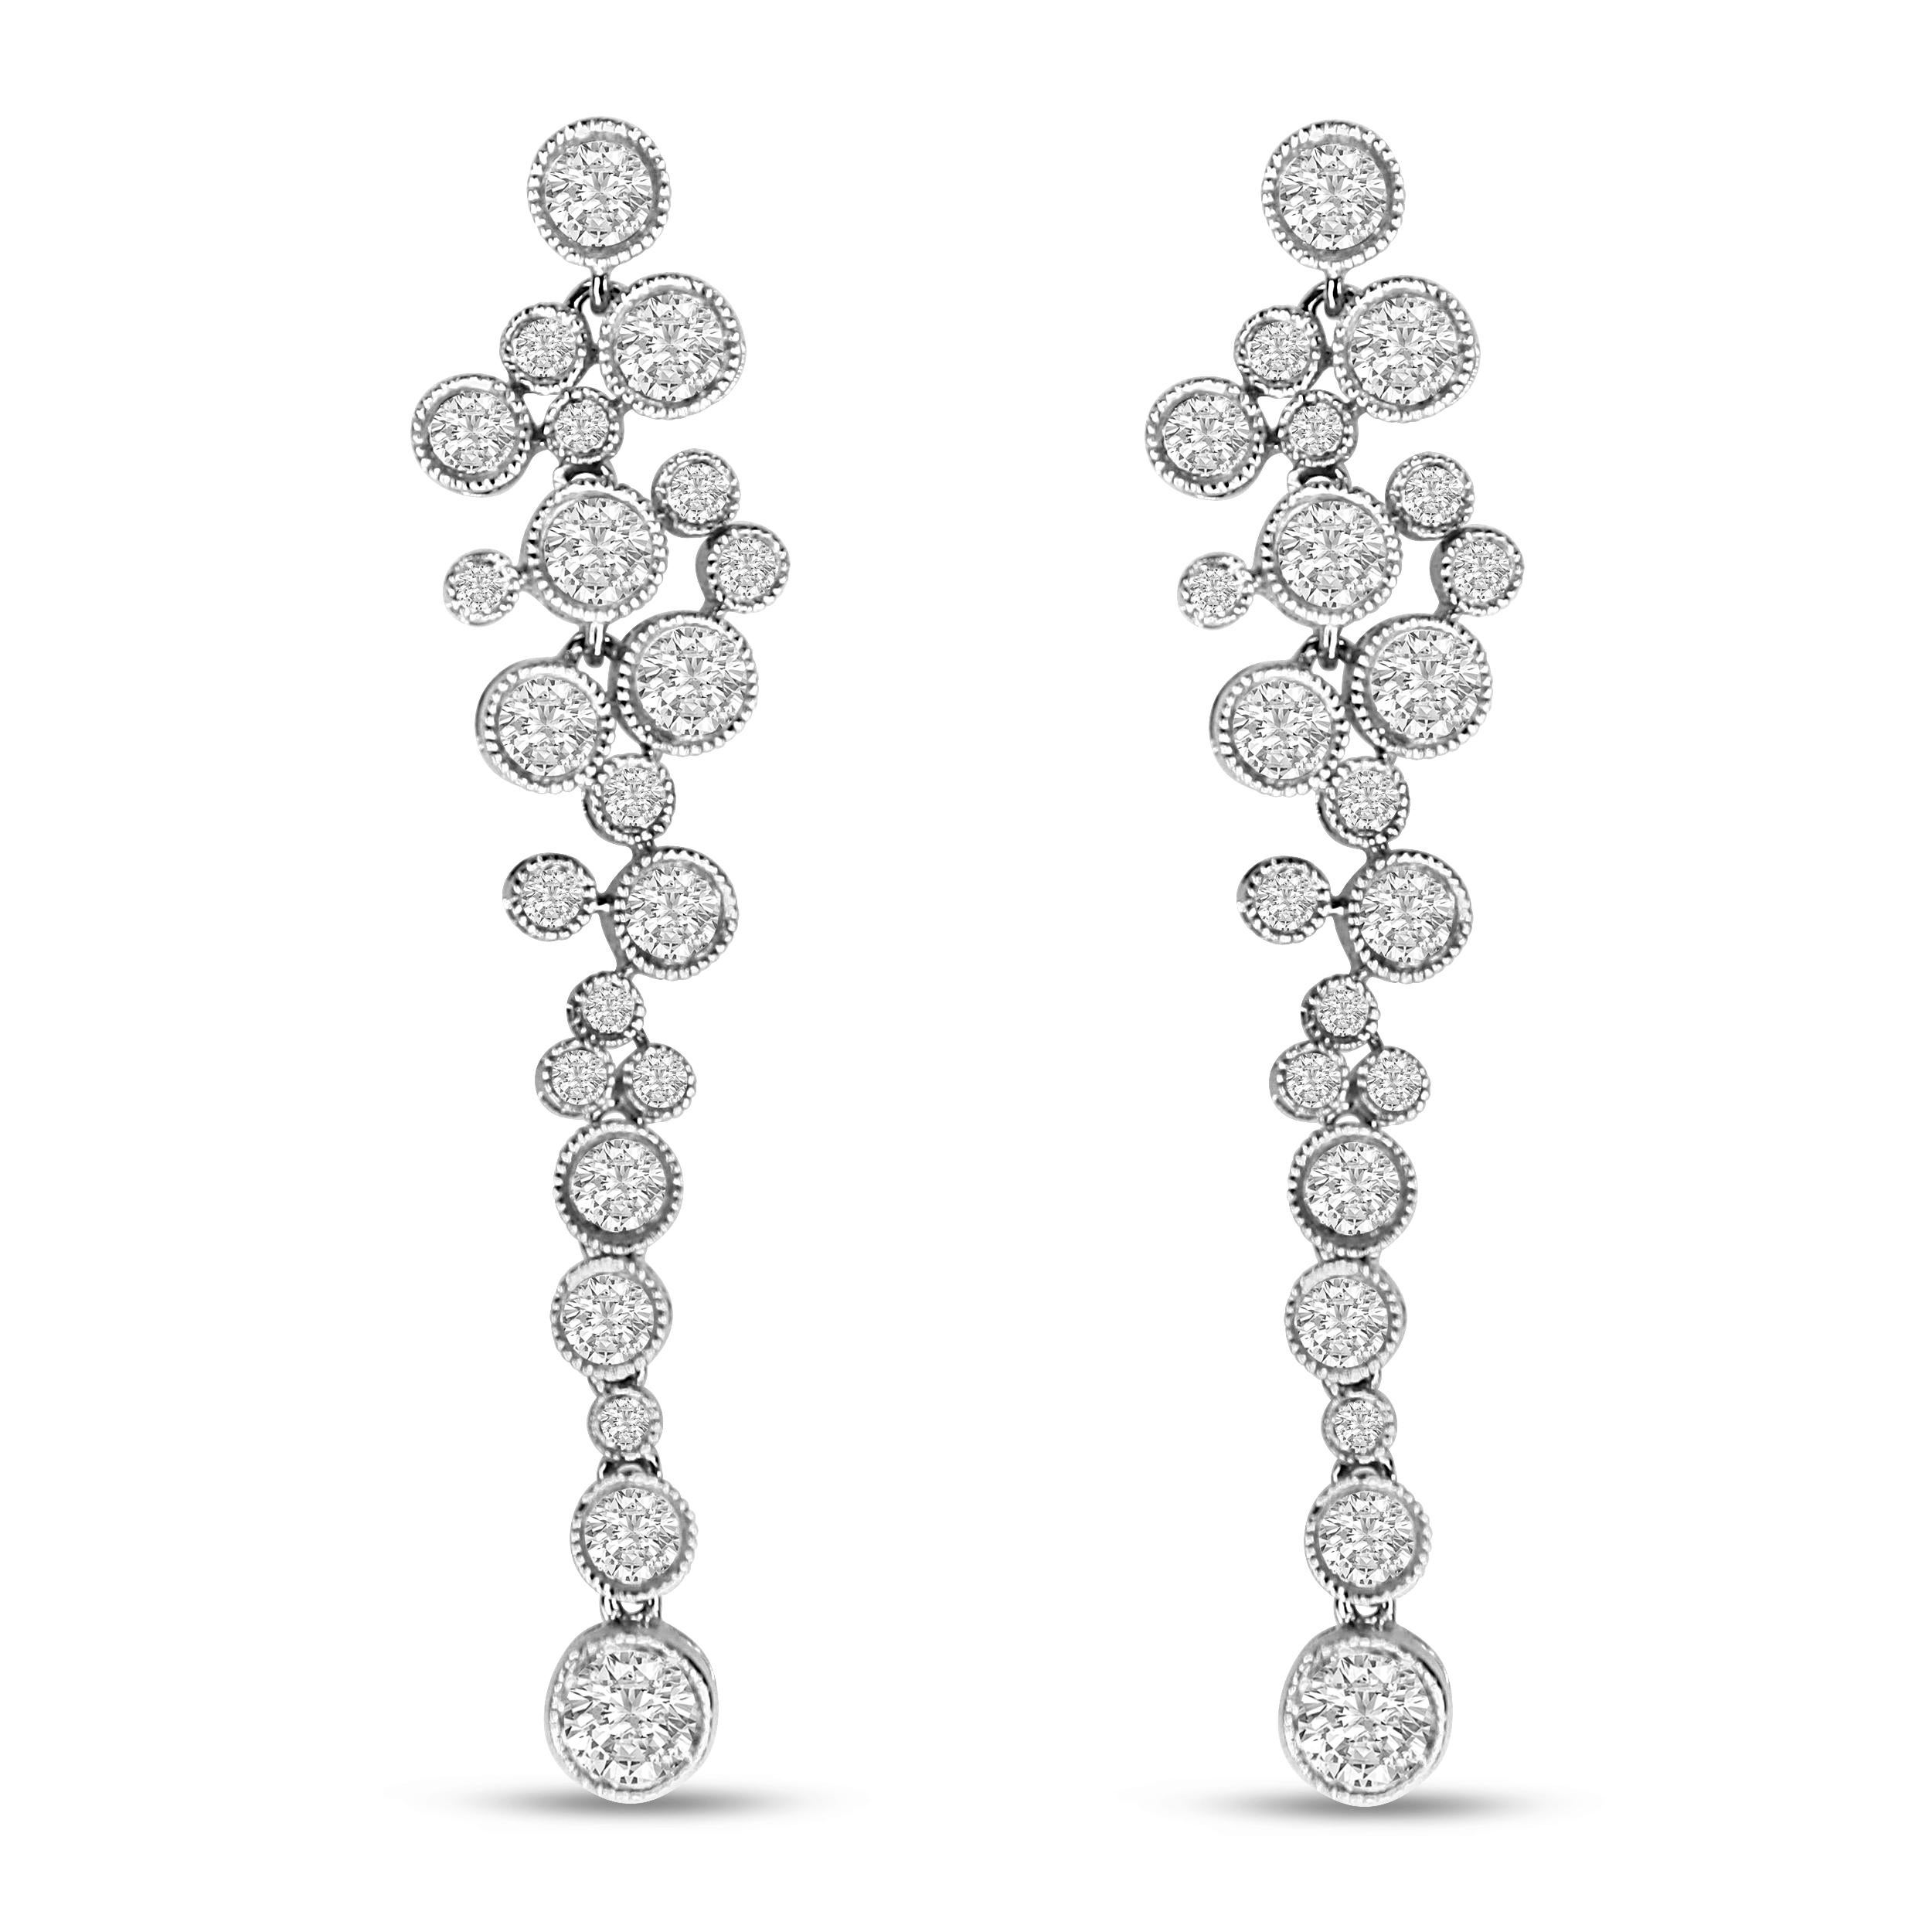 Drape yourself in the exquisite sparkle of these diamond waterfall earrings! A perfect statement piece for day or night, these dangle drop earrings are simply splendid in an array of round white diamonds of 3.15 total cttw in an approximate H-I